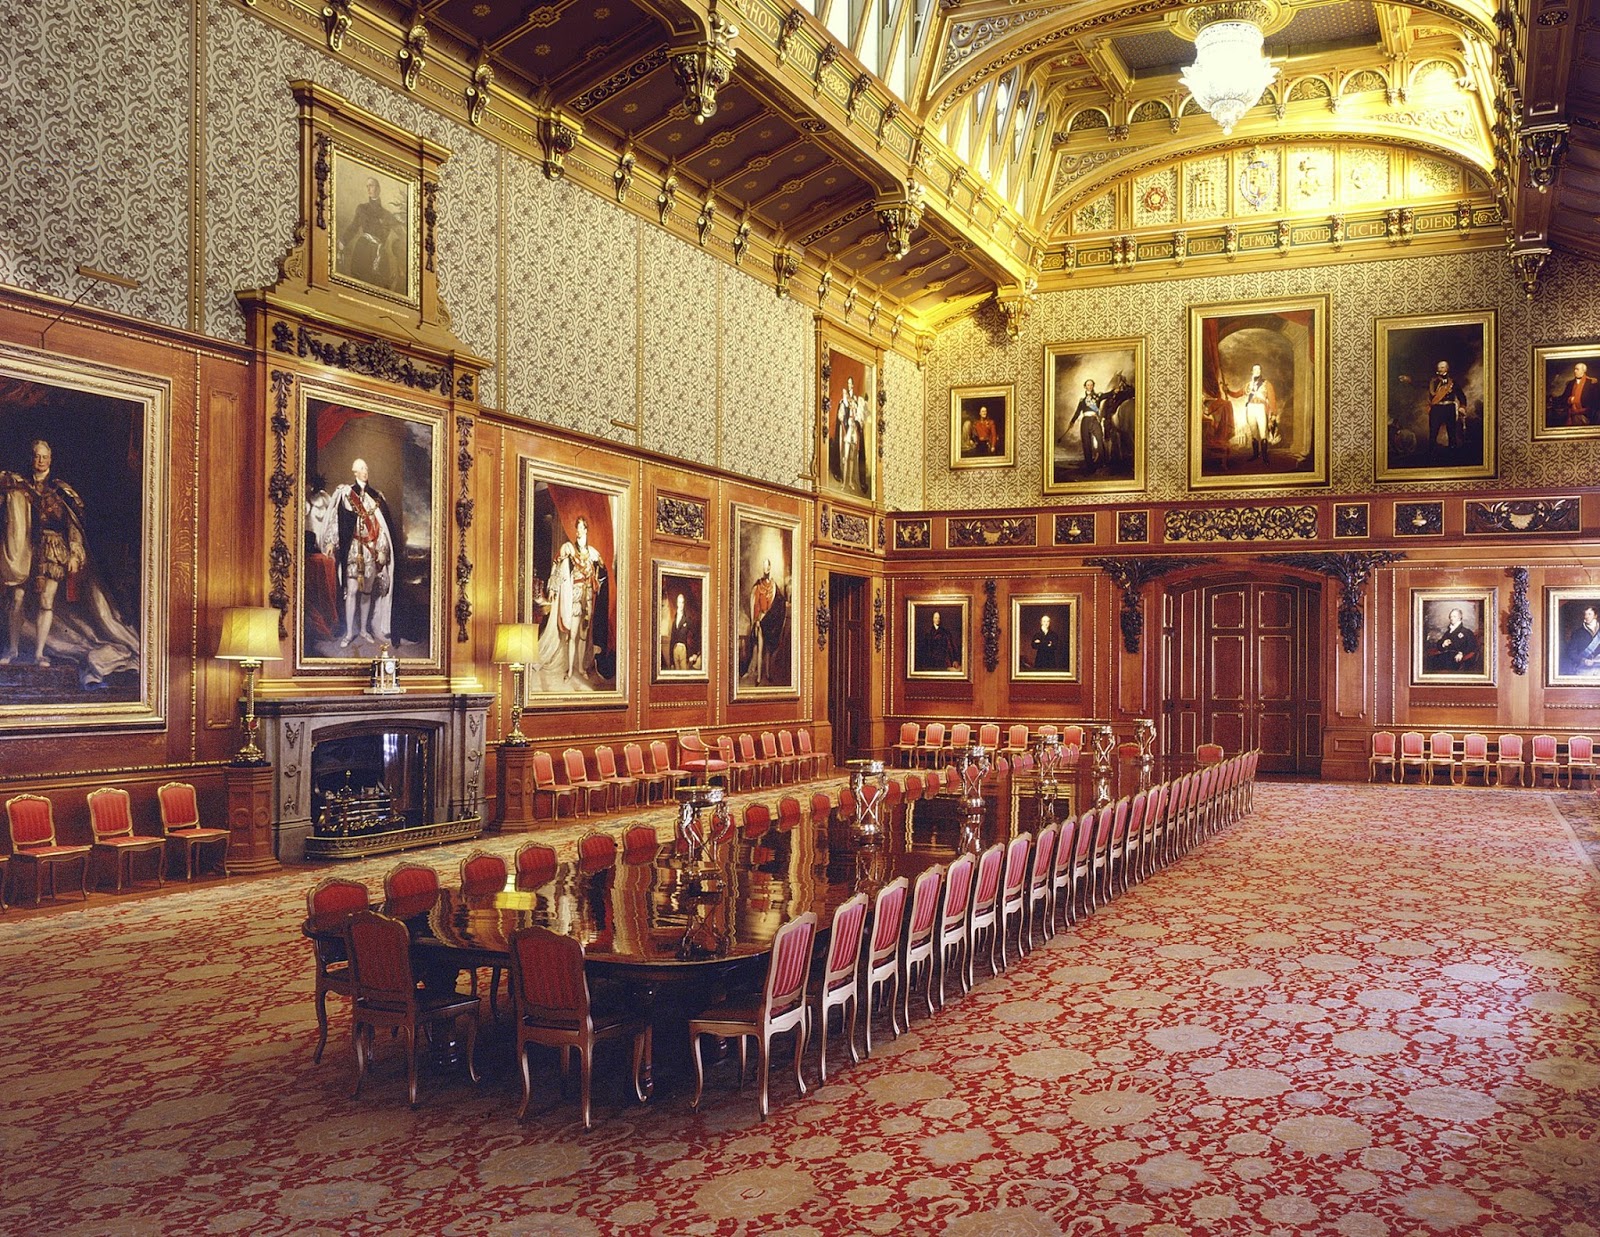 The Waterloo Chamber, Windsor Castle  Photo: Mark Fiennes  Royal Collection Trust © Her Majesty Queen Elizabeth II 2014